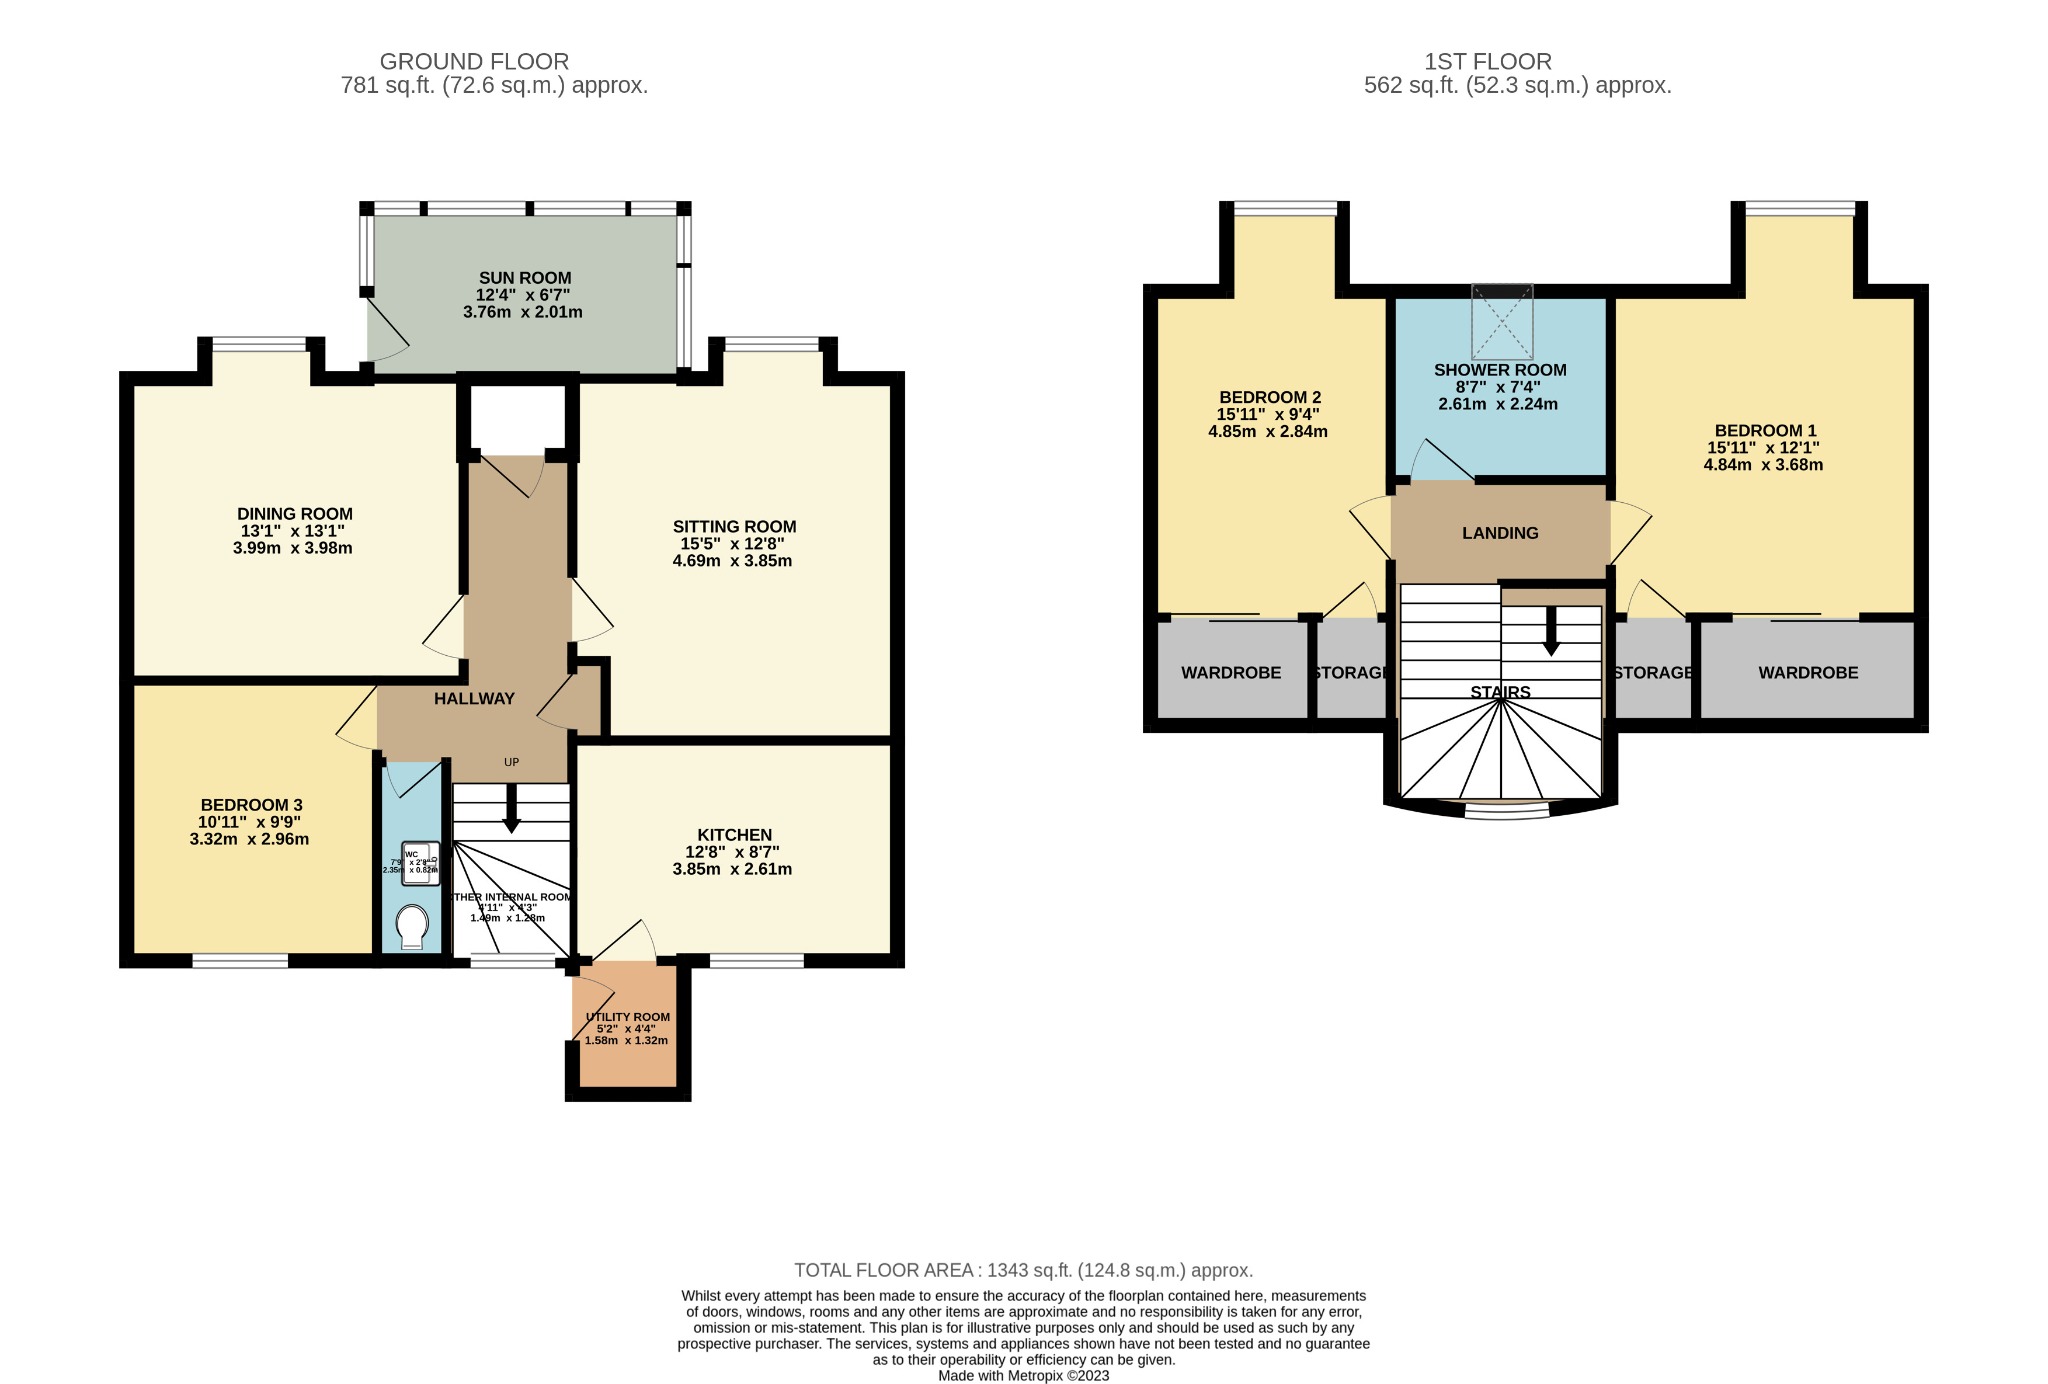 3 bed detached house for sale, Dunoon - Property floorplan